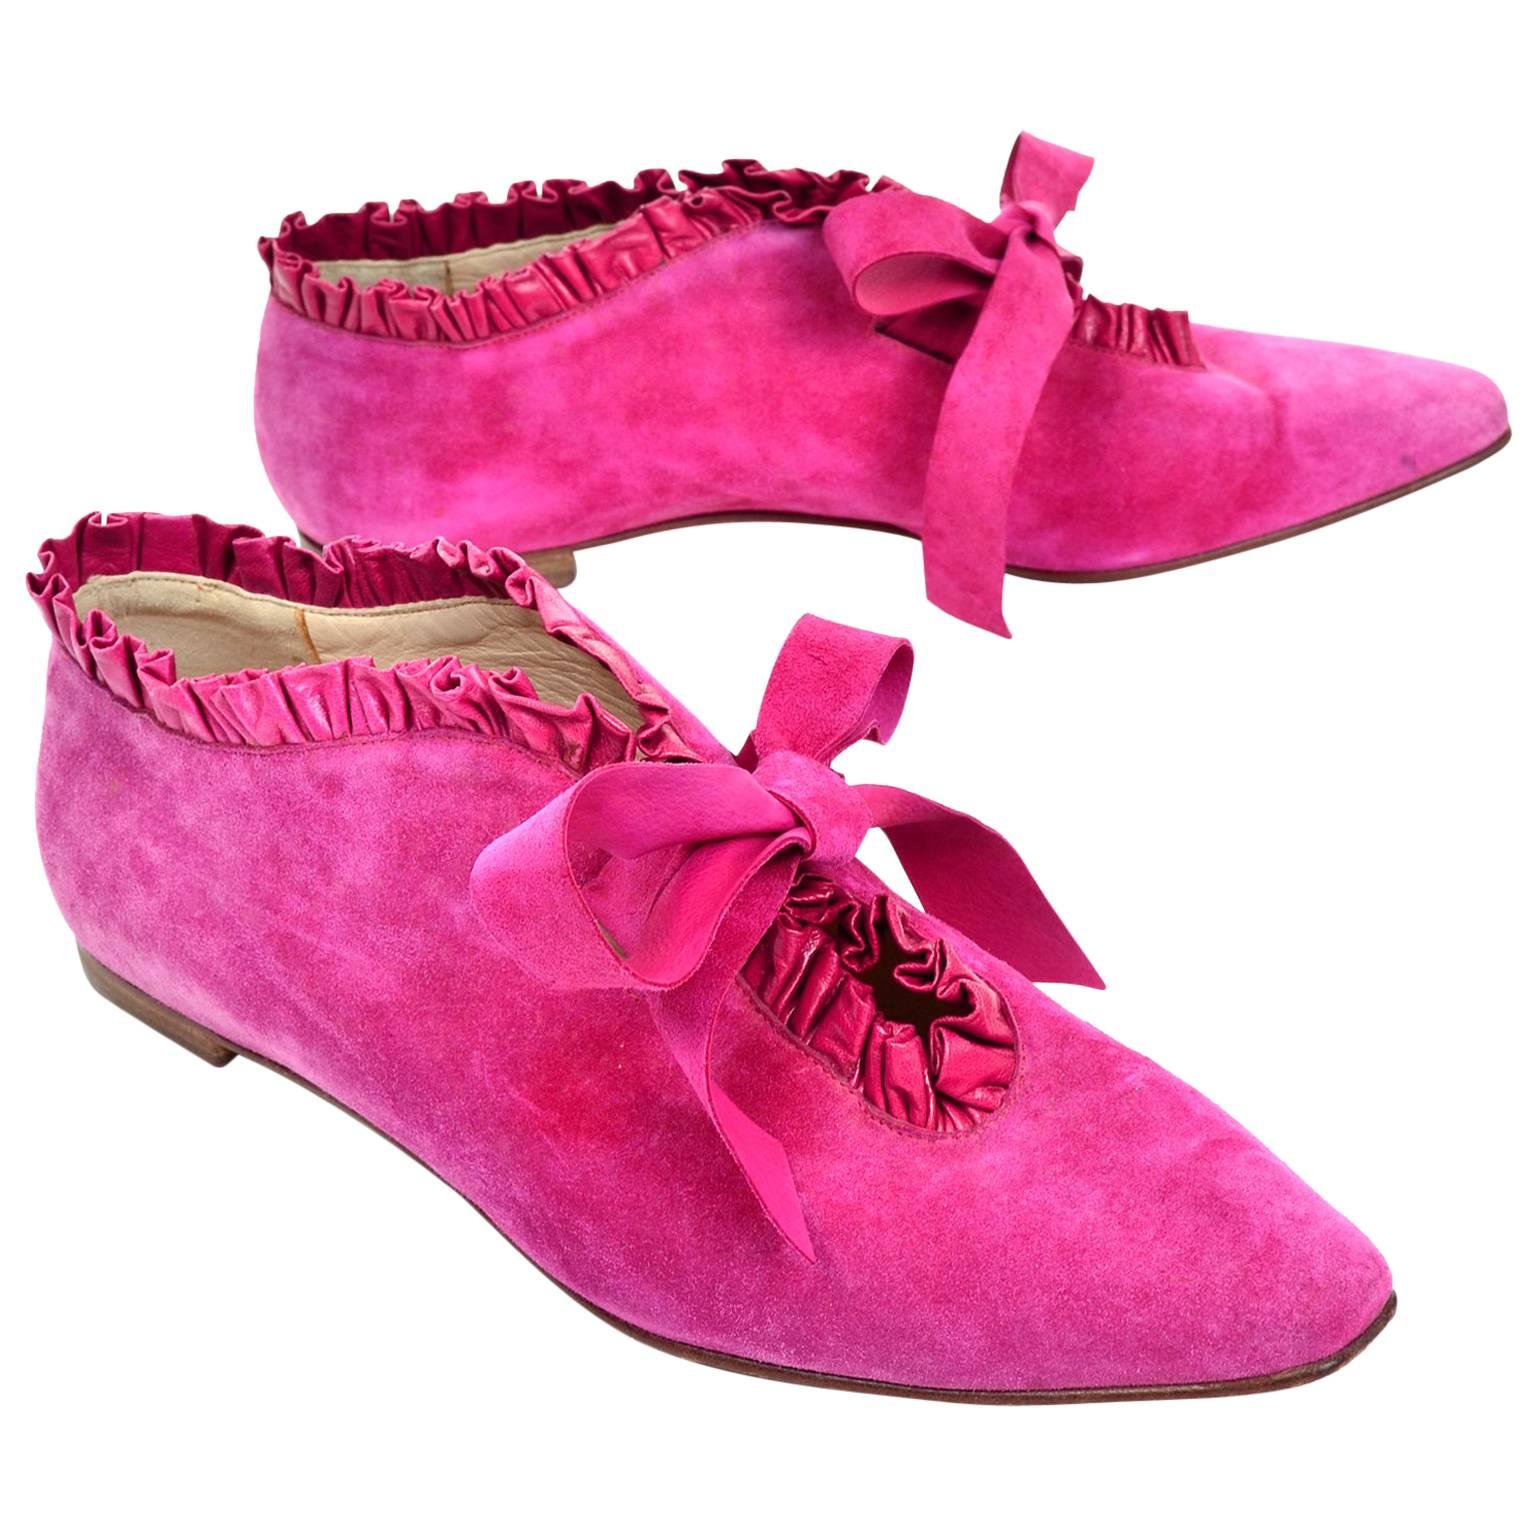 Manolo Blahnik Hot Pink Suede Ruffled Lace Up Vintage Booties Size 38.5 US 8.5